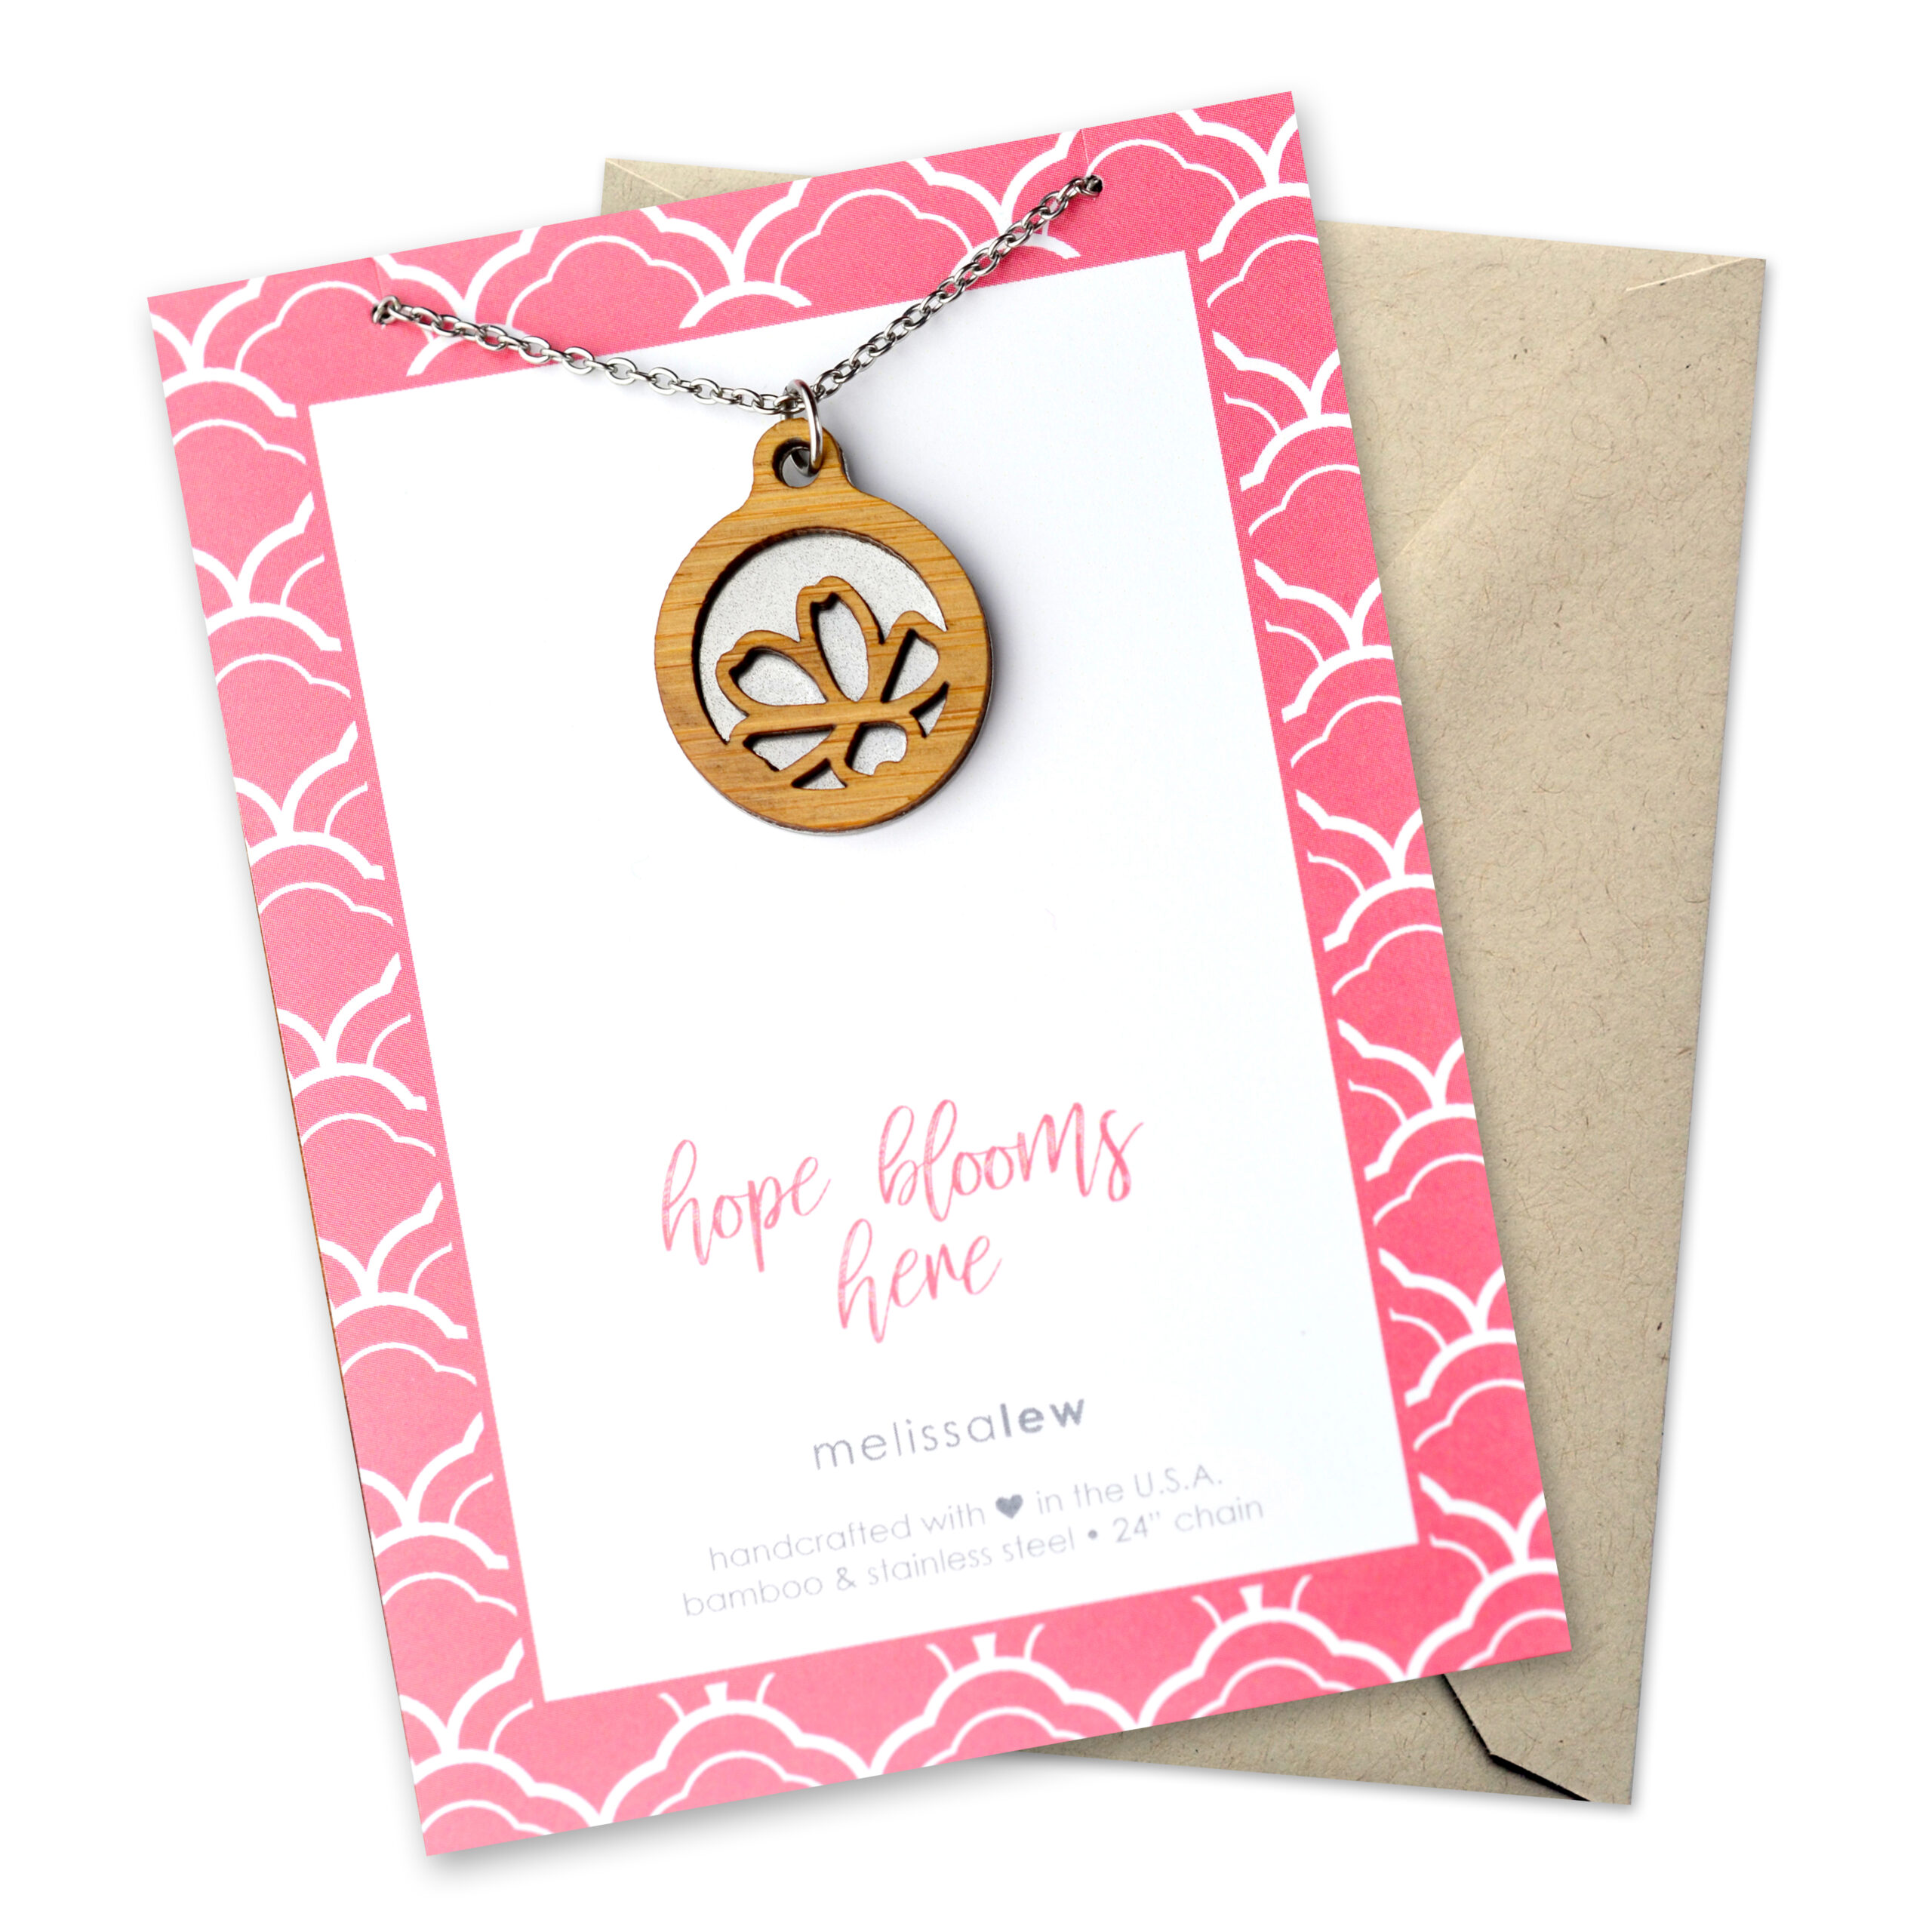 Bamboo cherry blossom necklace with card that says "Hope blooms here."